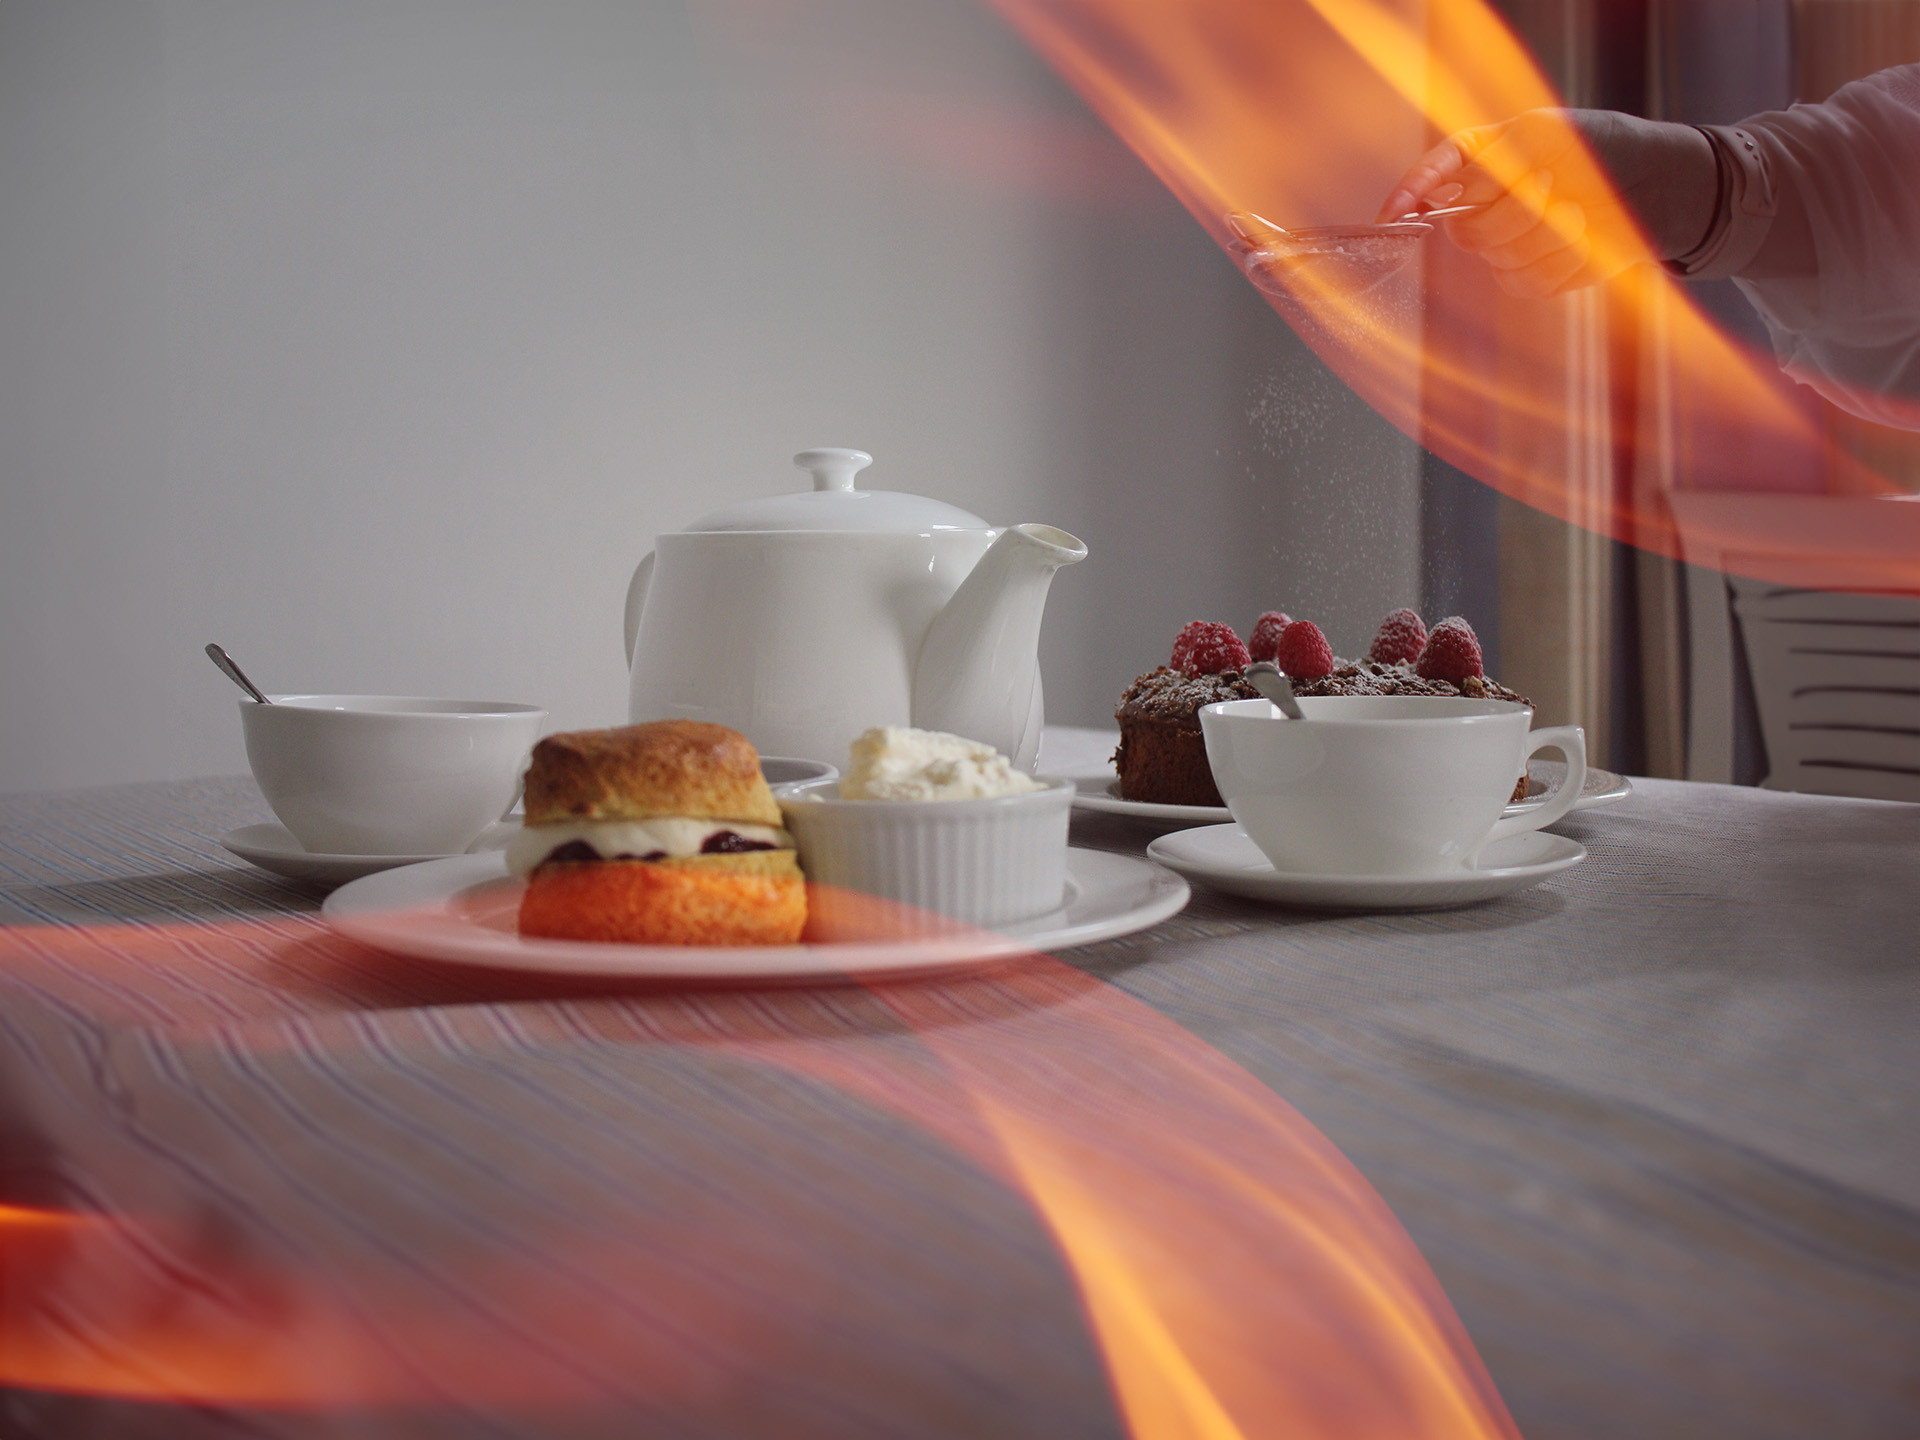 White tea set with a scone and cream, and a chocolate cake getting icing sugar dusted over the top of it.